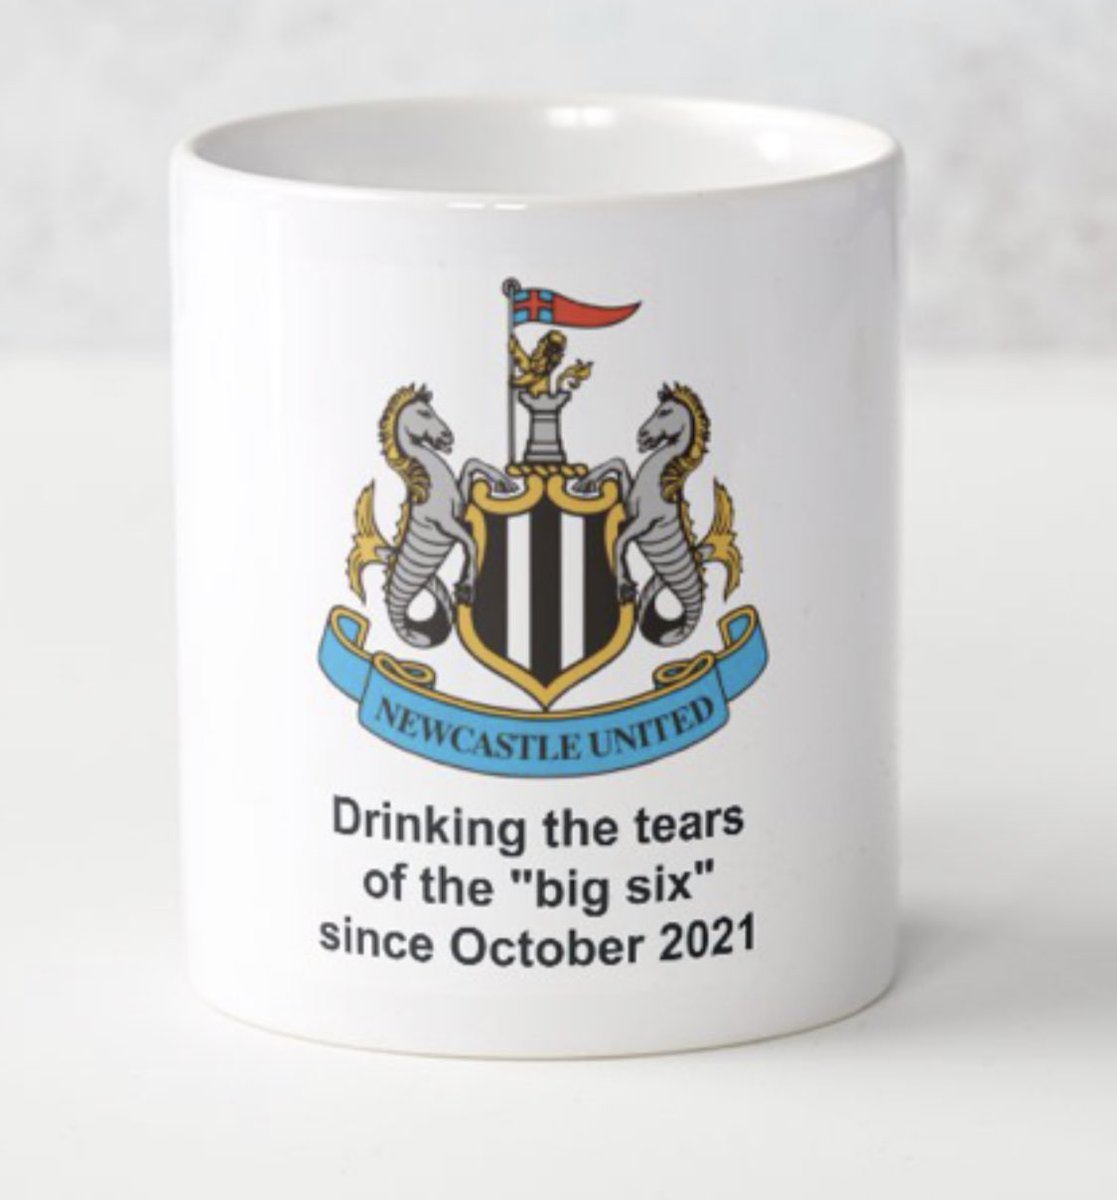 #nufc someone please buy me this for Christmas 🤞

#PremierLeagueIsCorrupt